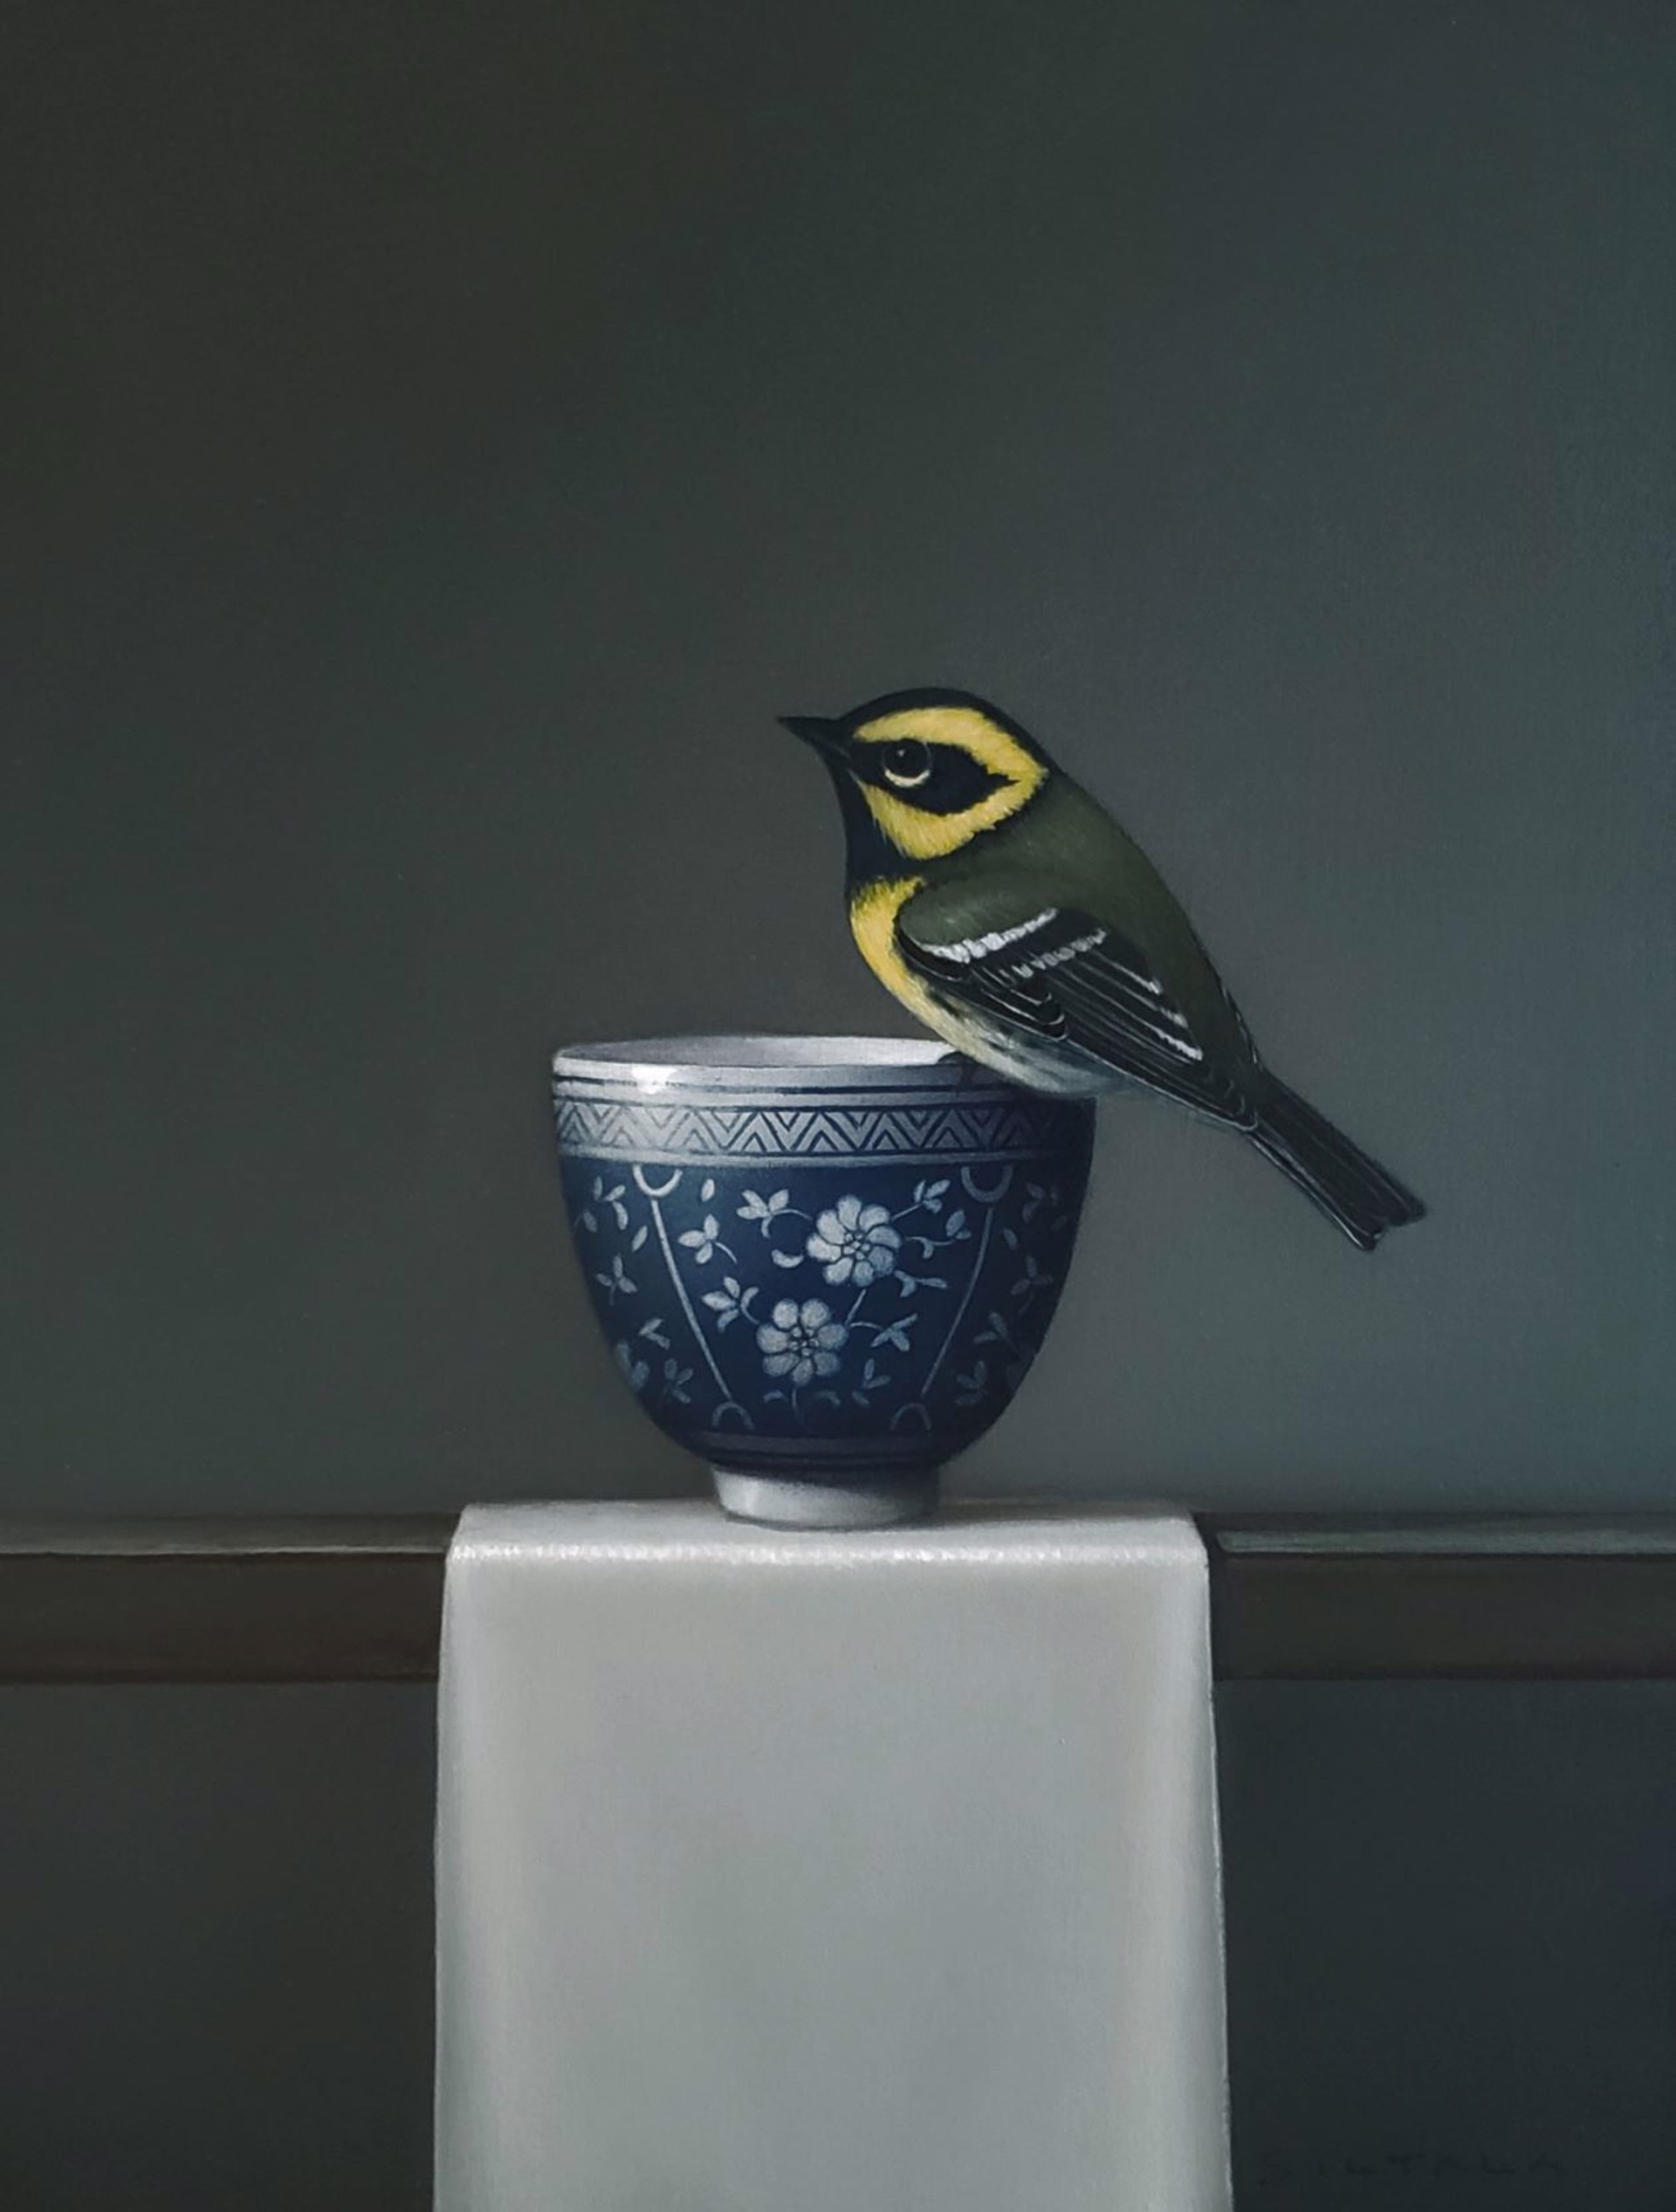 Still Life with Townsend's Warbler by Sarah Siltala